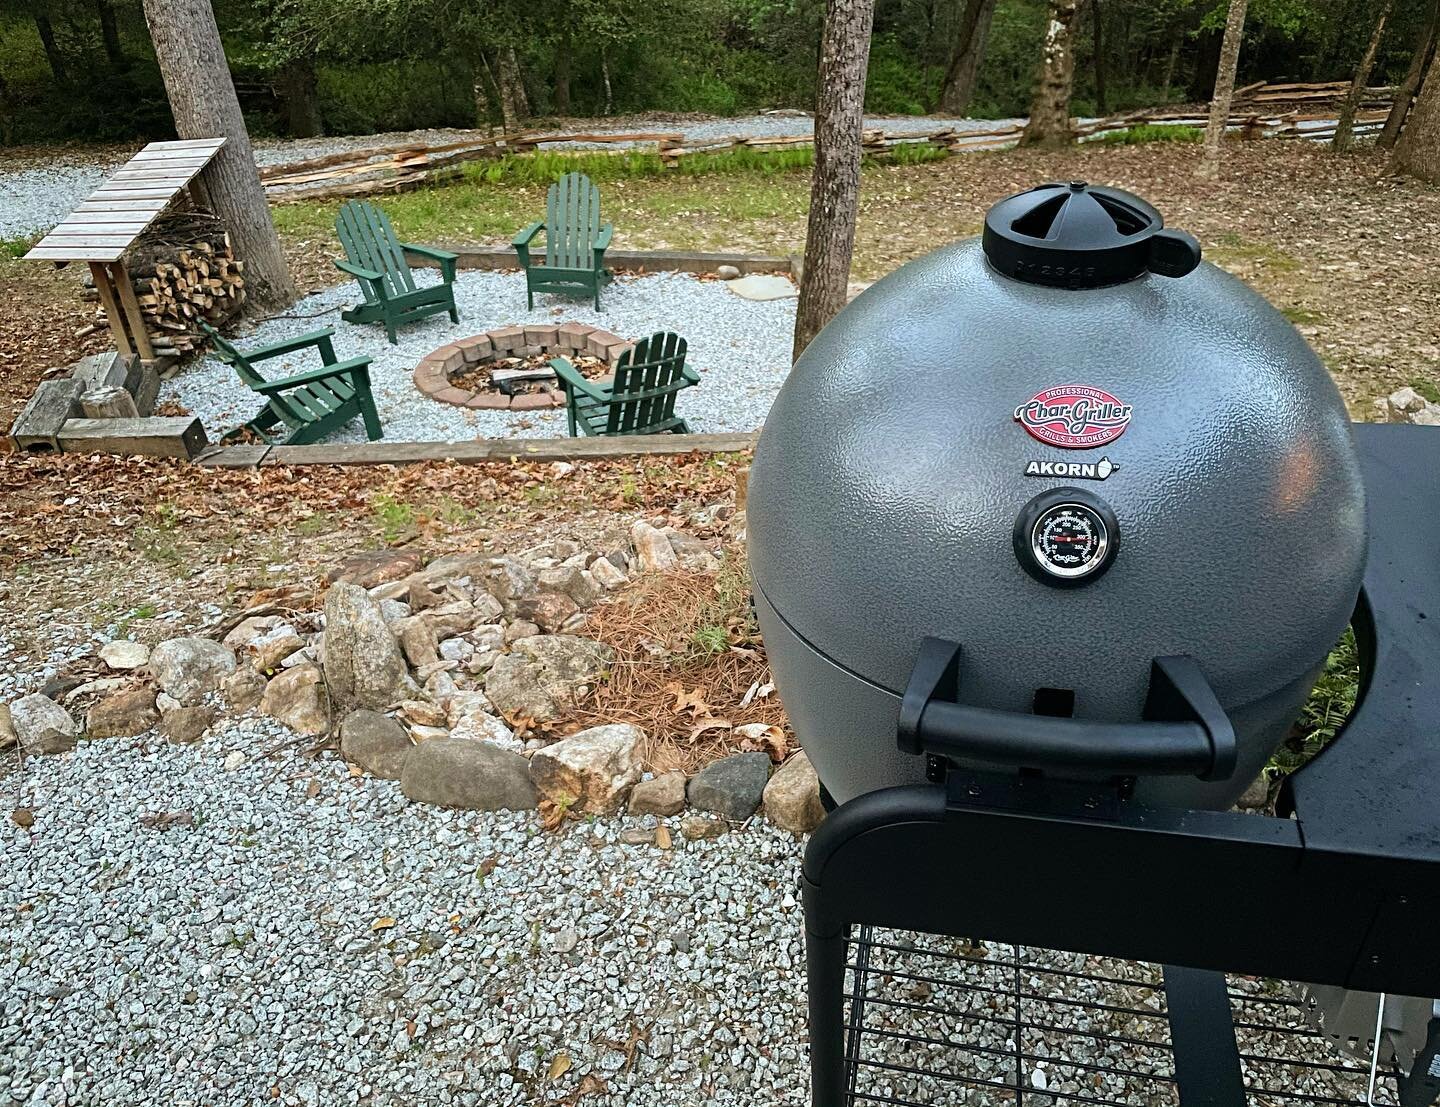 Prime grilling-time is upon us, and ours is seasoned and ready for action... pork butt, asparagus, or hot dog, nothing quite like the smell of charcoal. #akorngrill